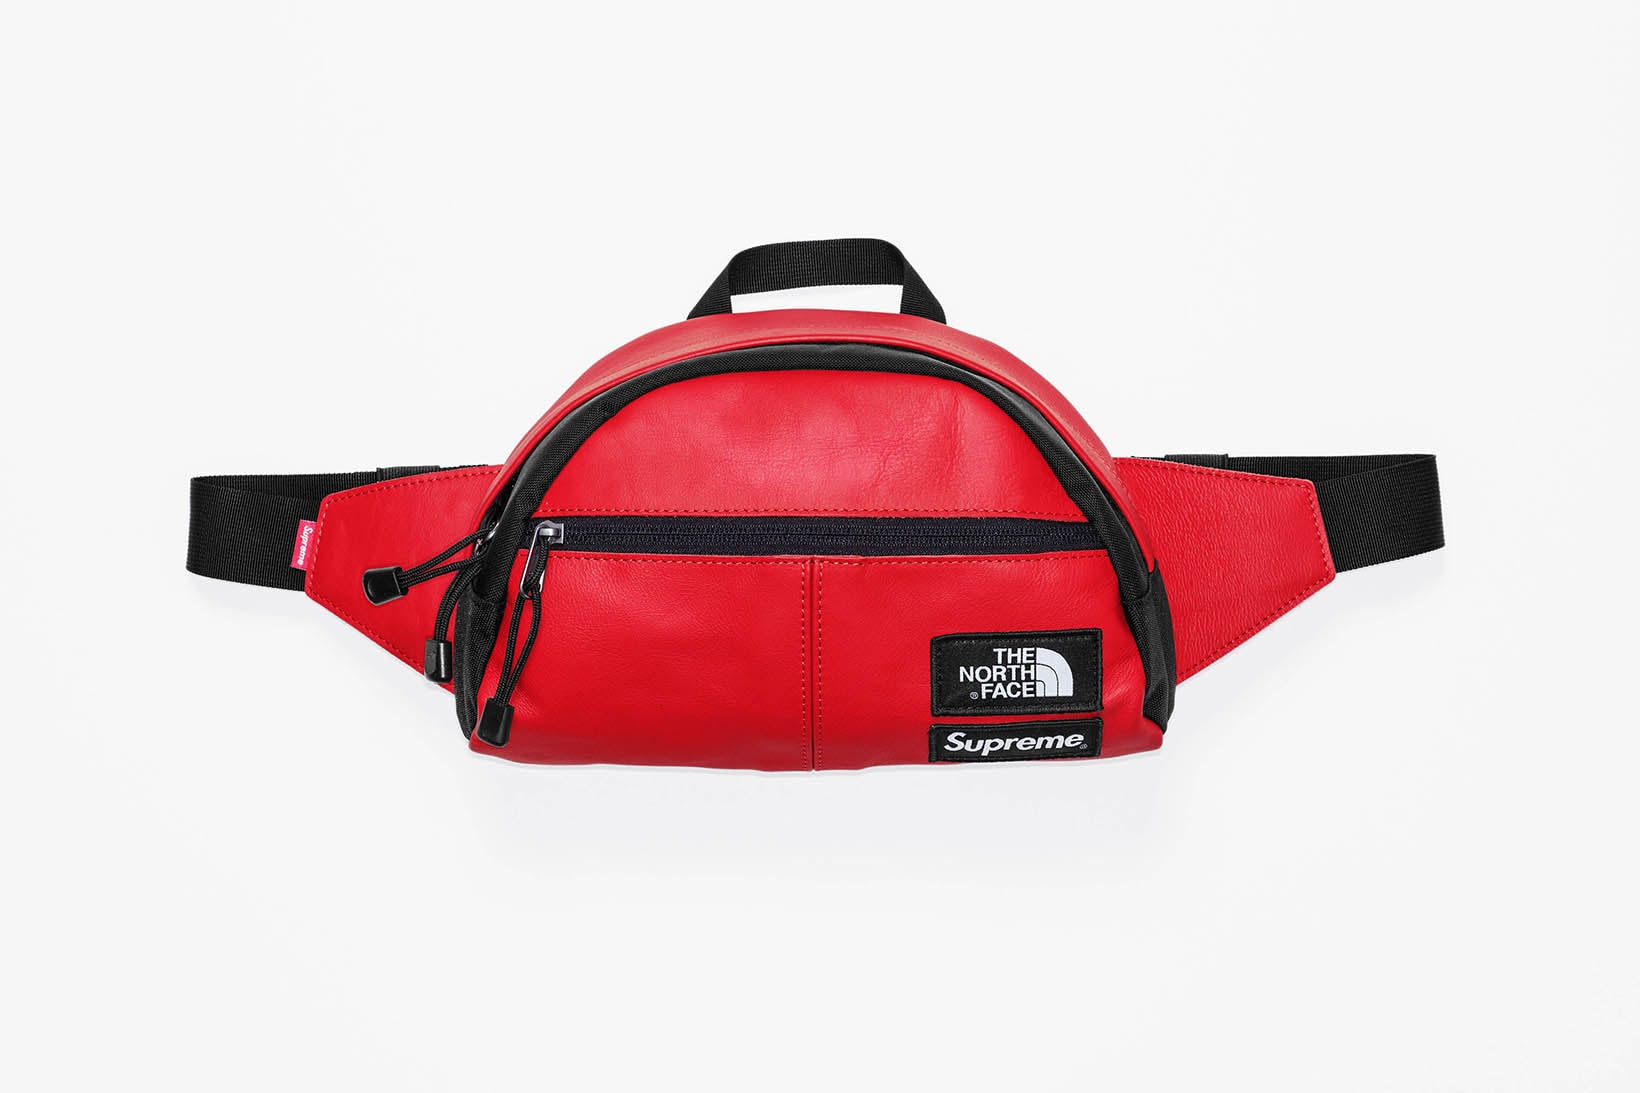 Supreme x The North Face 2017 Fall Red Daypack